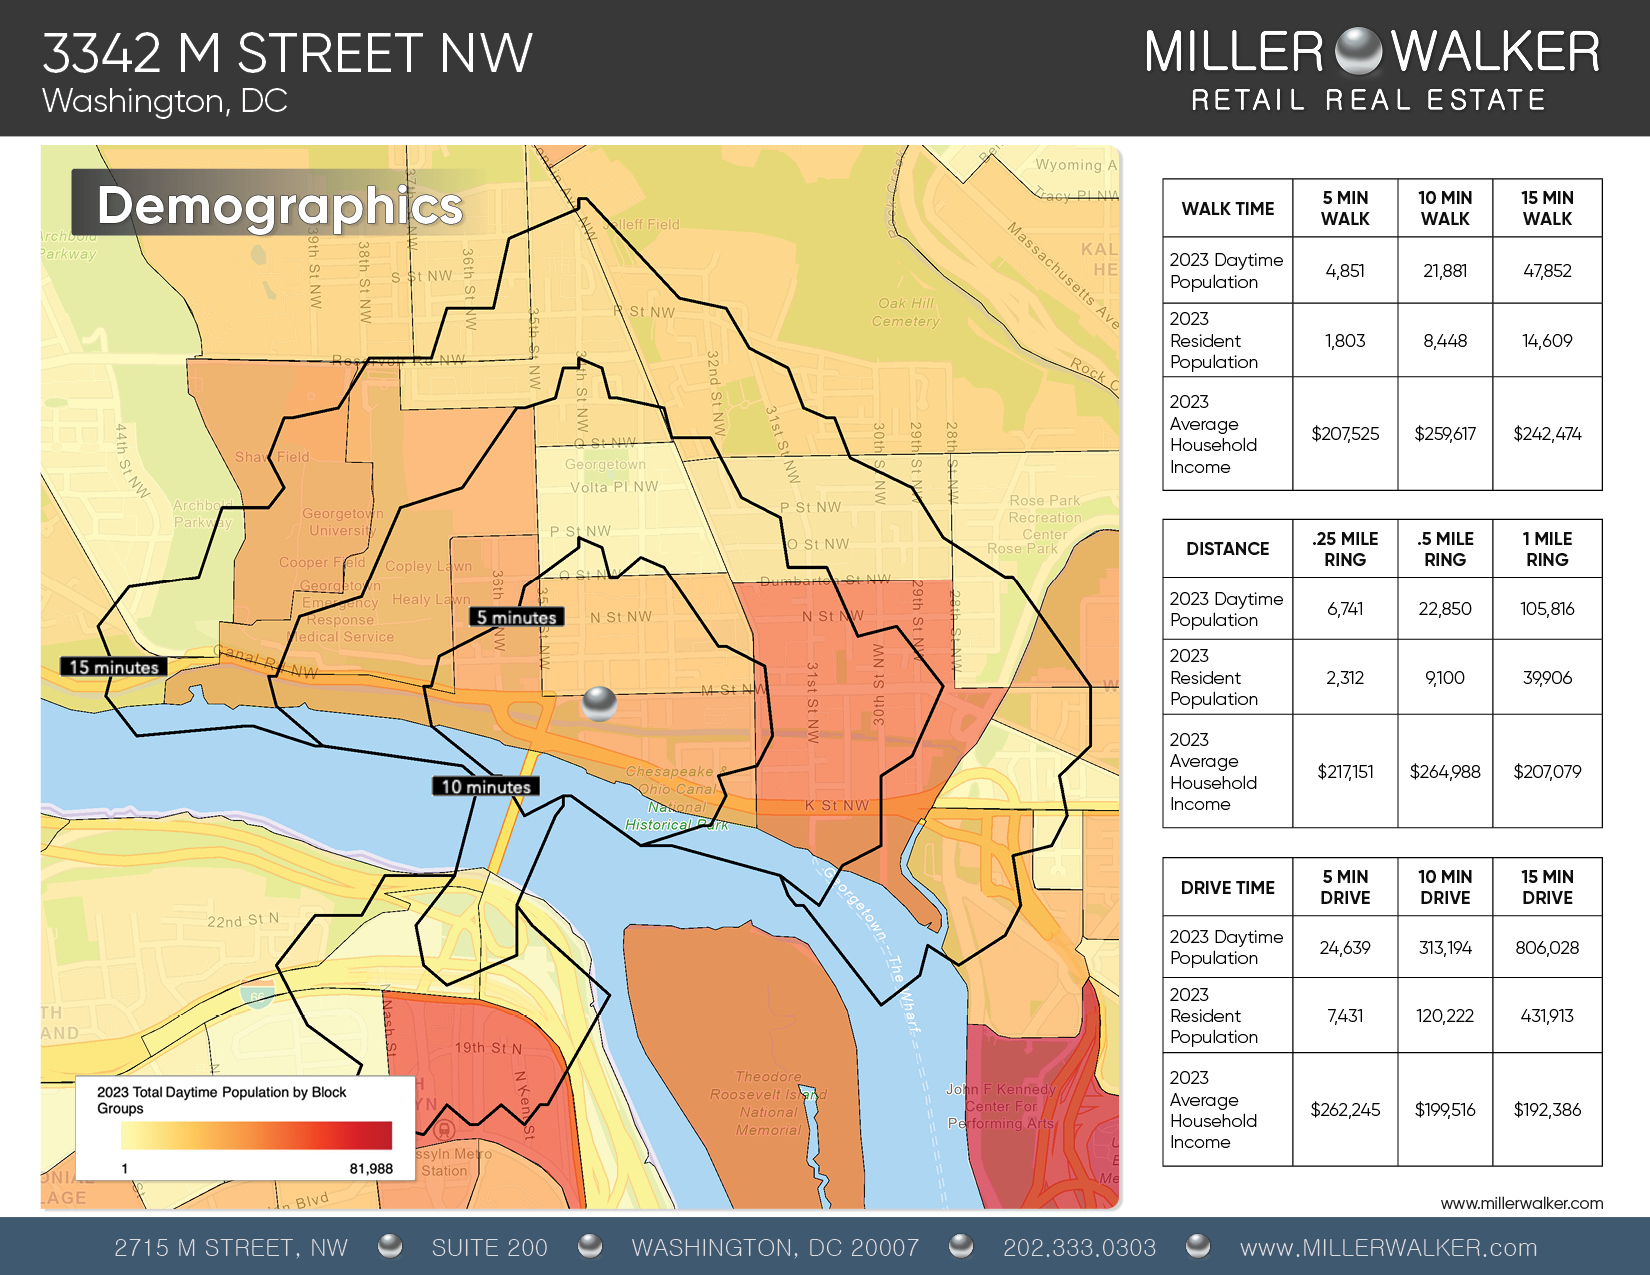 Map illustrating demographic data within walking distance, drive time, and distance radius from 3342 M St NW, Georgetown, Washington, DC.